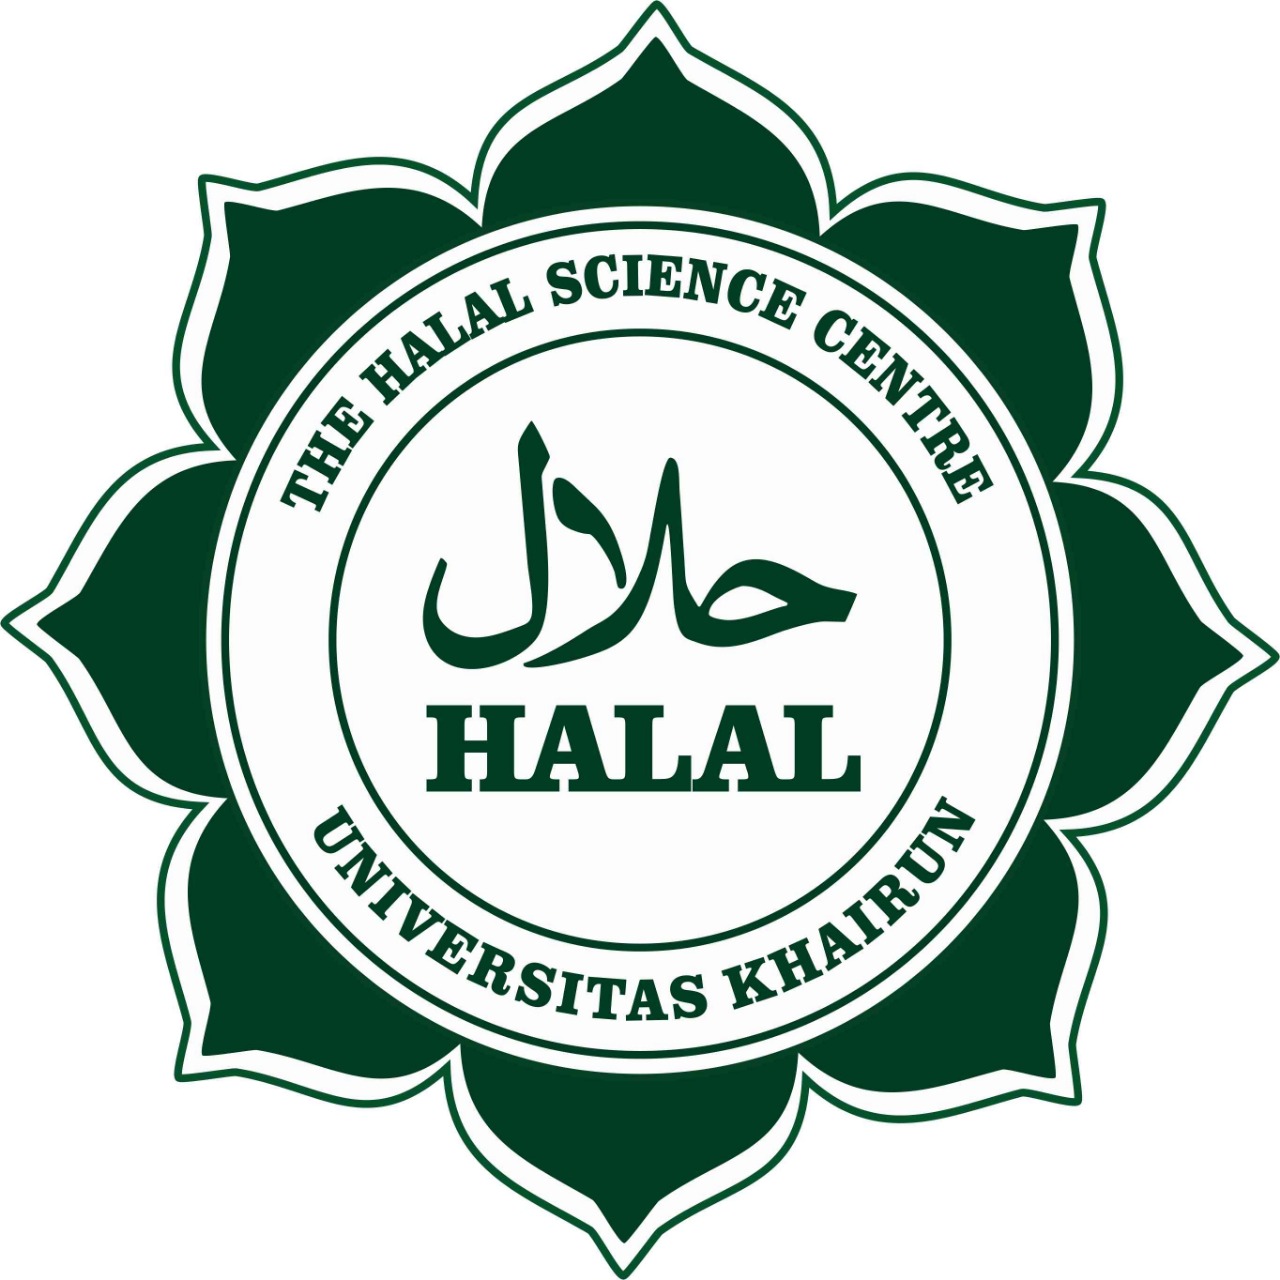 The Halal Science Centre